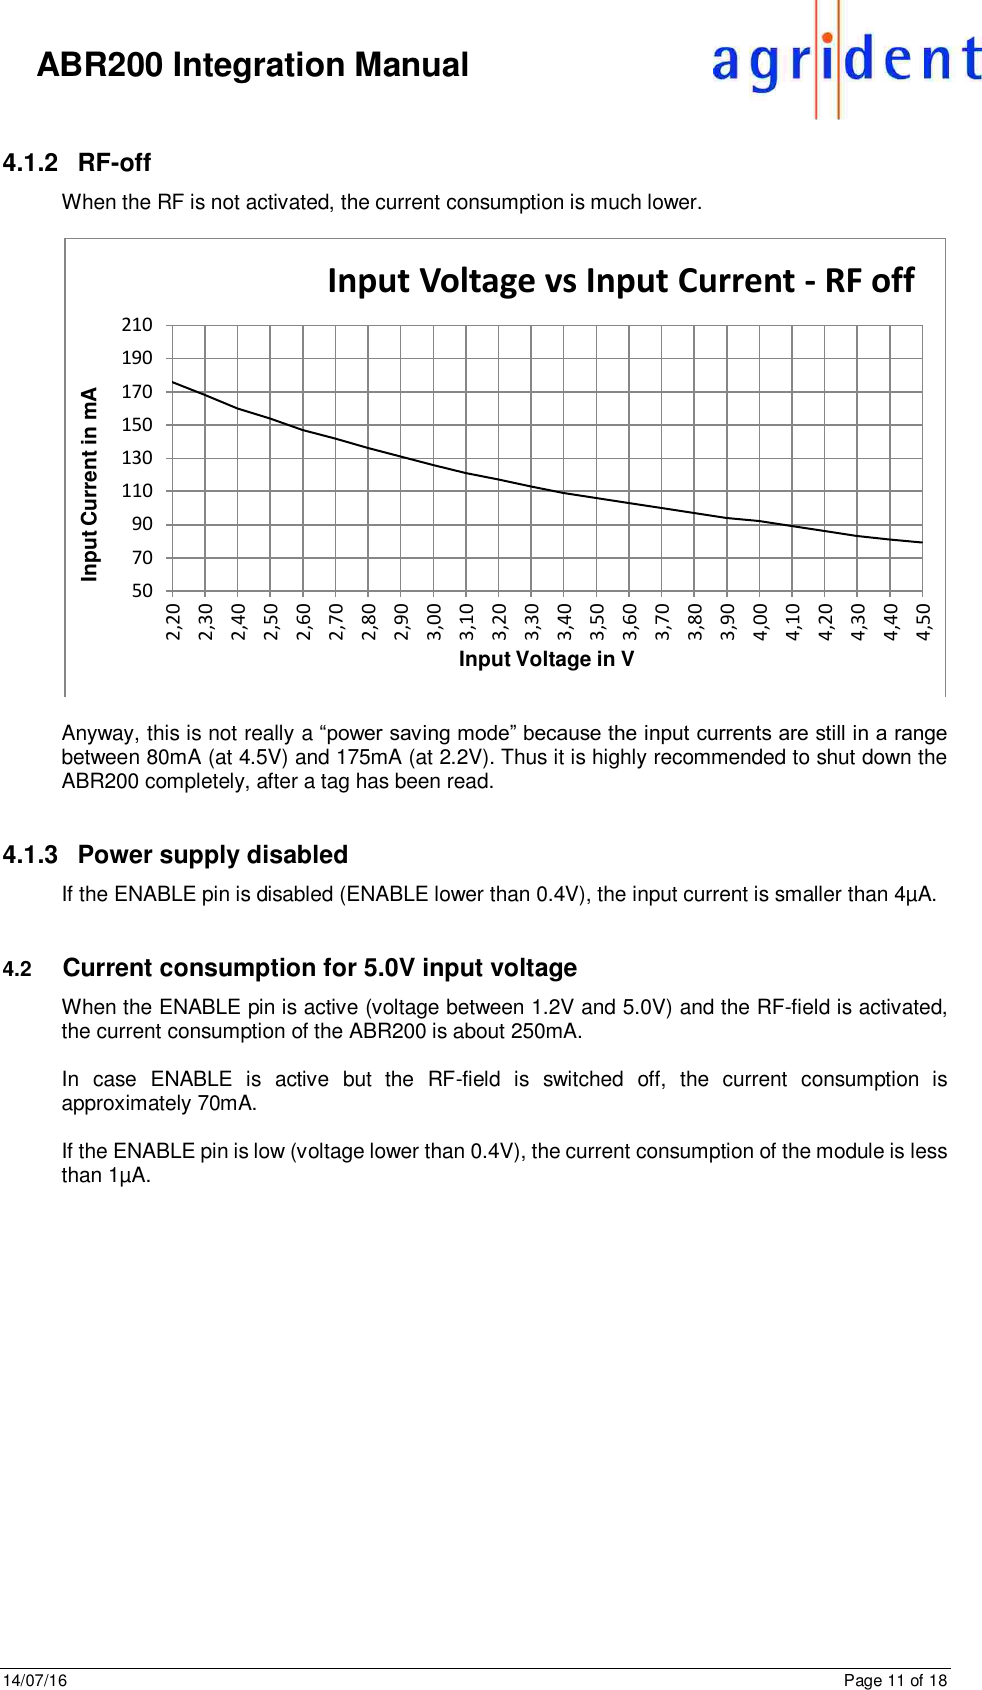 14/07/16      Page 11 of 18      ABR200 Integration Manual  4.1.2  RF-off When the RF is not activated, the current consumption is much lower.    Anyway, this is not really a “power saving mode” because the input currents are still in a range between 80mA (at 4.5V) and 175mA (at 2.2V). Thus it is highly recommended to shut down the ABR200 completely, after a tag has been read.   4.1.3  Power supply disabled If the ENABLE pin is disabled (ENABLE lower than 0.4V), the input current is smaller than 4µA.   4.2  Current consumption for 5.0V input voltage When the ENABLE pin is active (voltage between 1.2V and 5.0V) and the RF-field is activated, the current consumption of the ABR200 is about 250mA.   In  case  ENABLE  is  active  but  the  RF-field  is  switched  off,  the  current  consumption  is approximately 70mA.  If the ENABLE pin is low (voltage lower than 0.4V), the current consumption of the module is less than 1µA.     5070901101301501701902102,202,302,402,502,602,702,802,903,003,103,203,303,403,503,603,703,803,904,004,104,204,304,404,50Input Current in mAInput Voltage in VInput Voltage vs Input Current - RF off